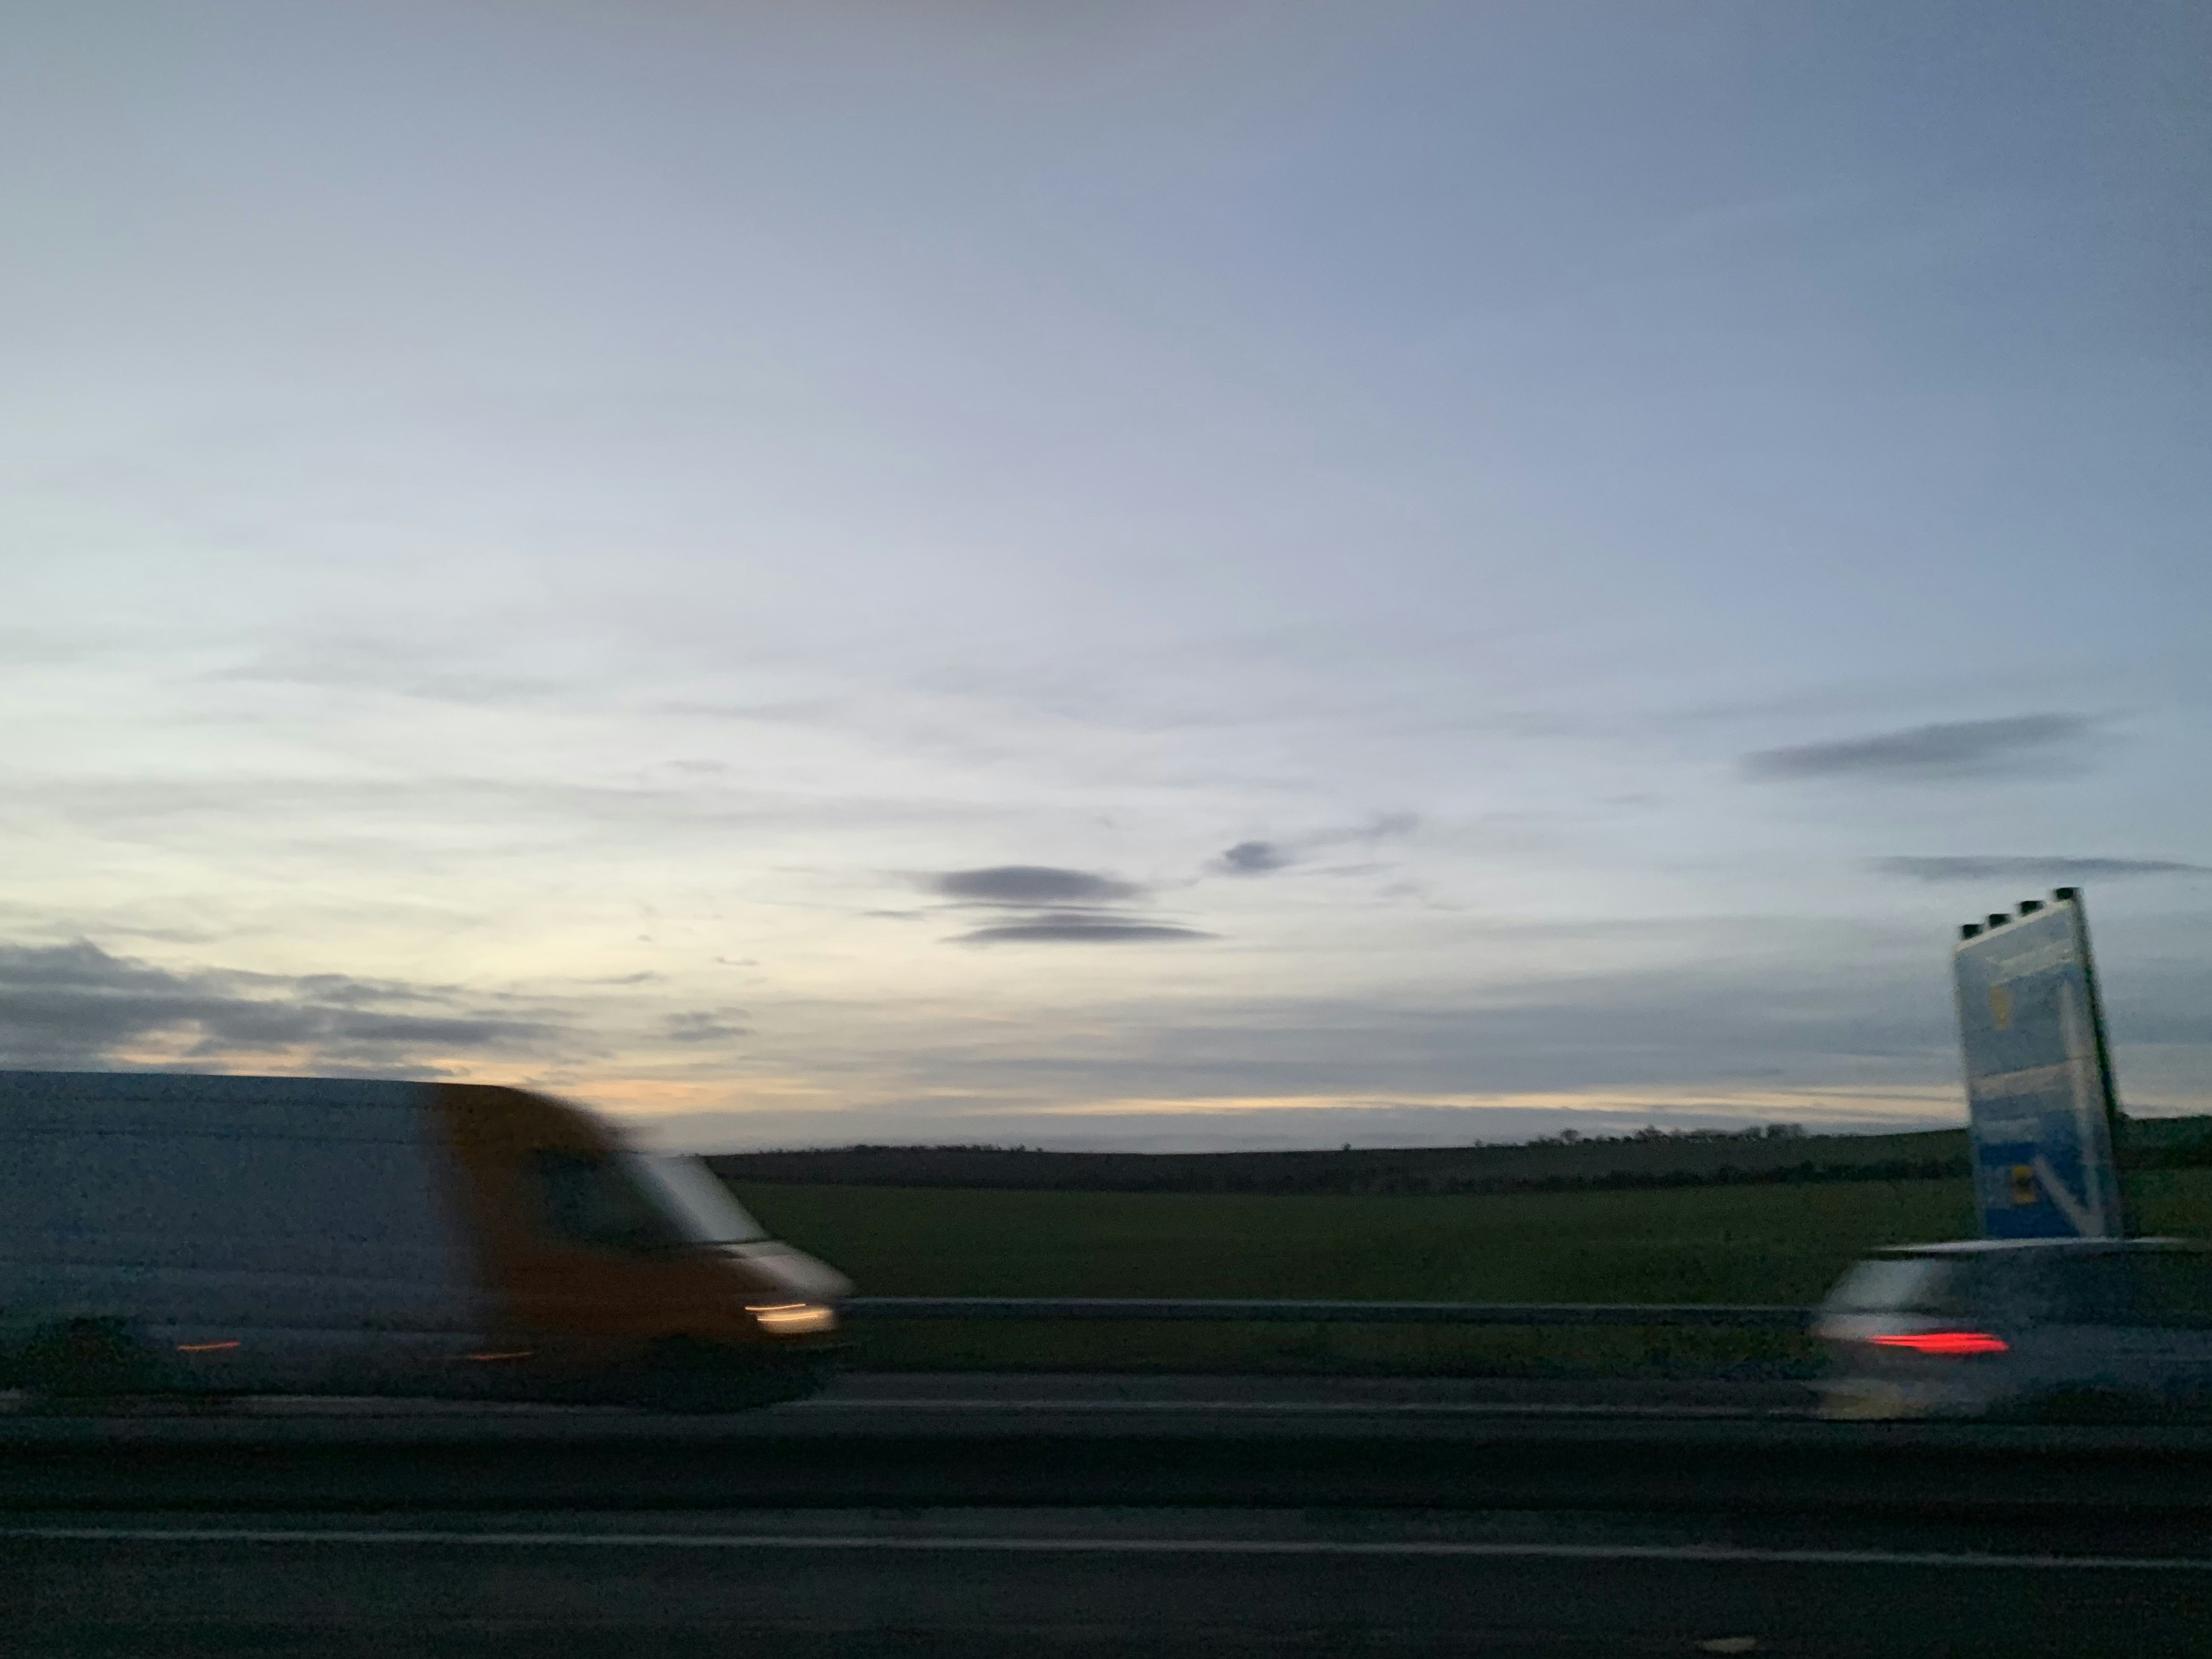 Sunset views along the expressway in the U.K.